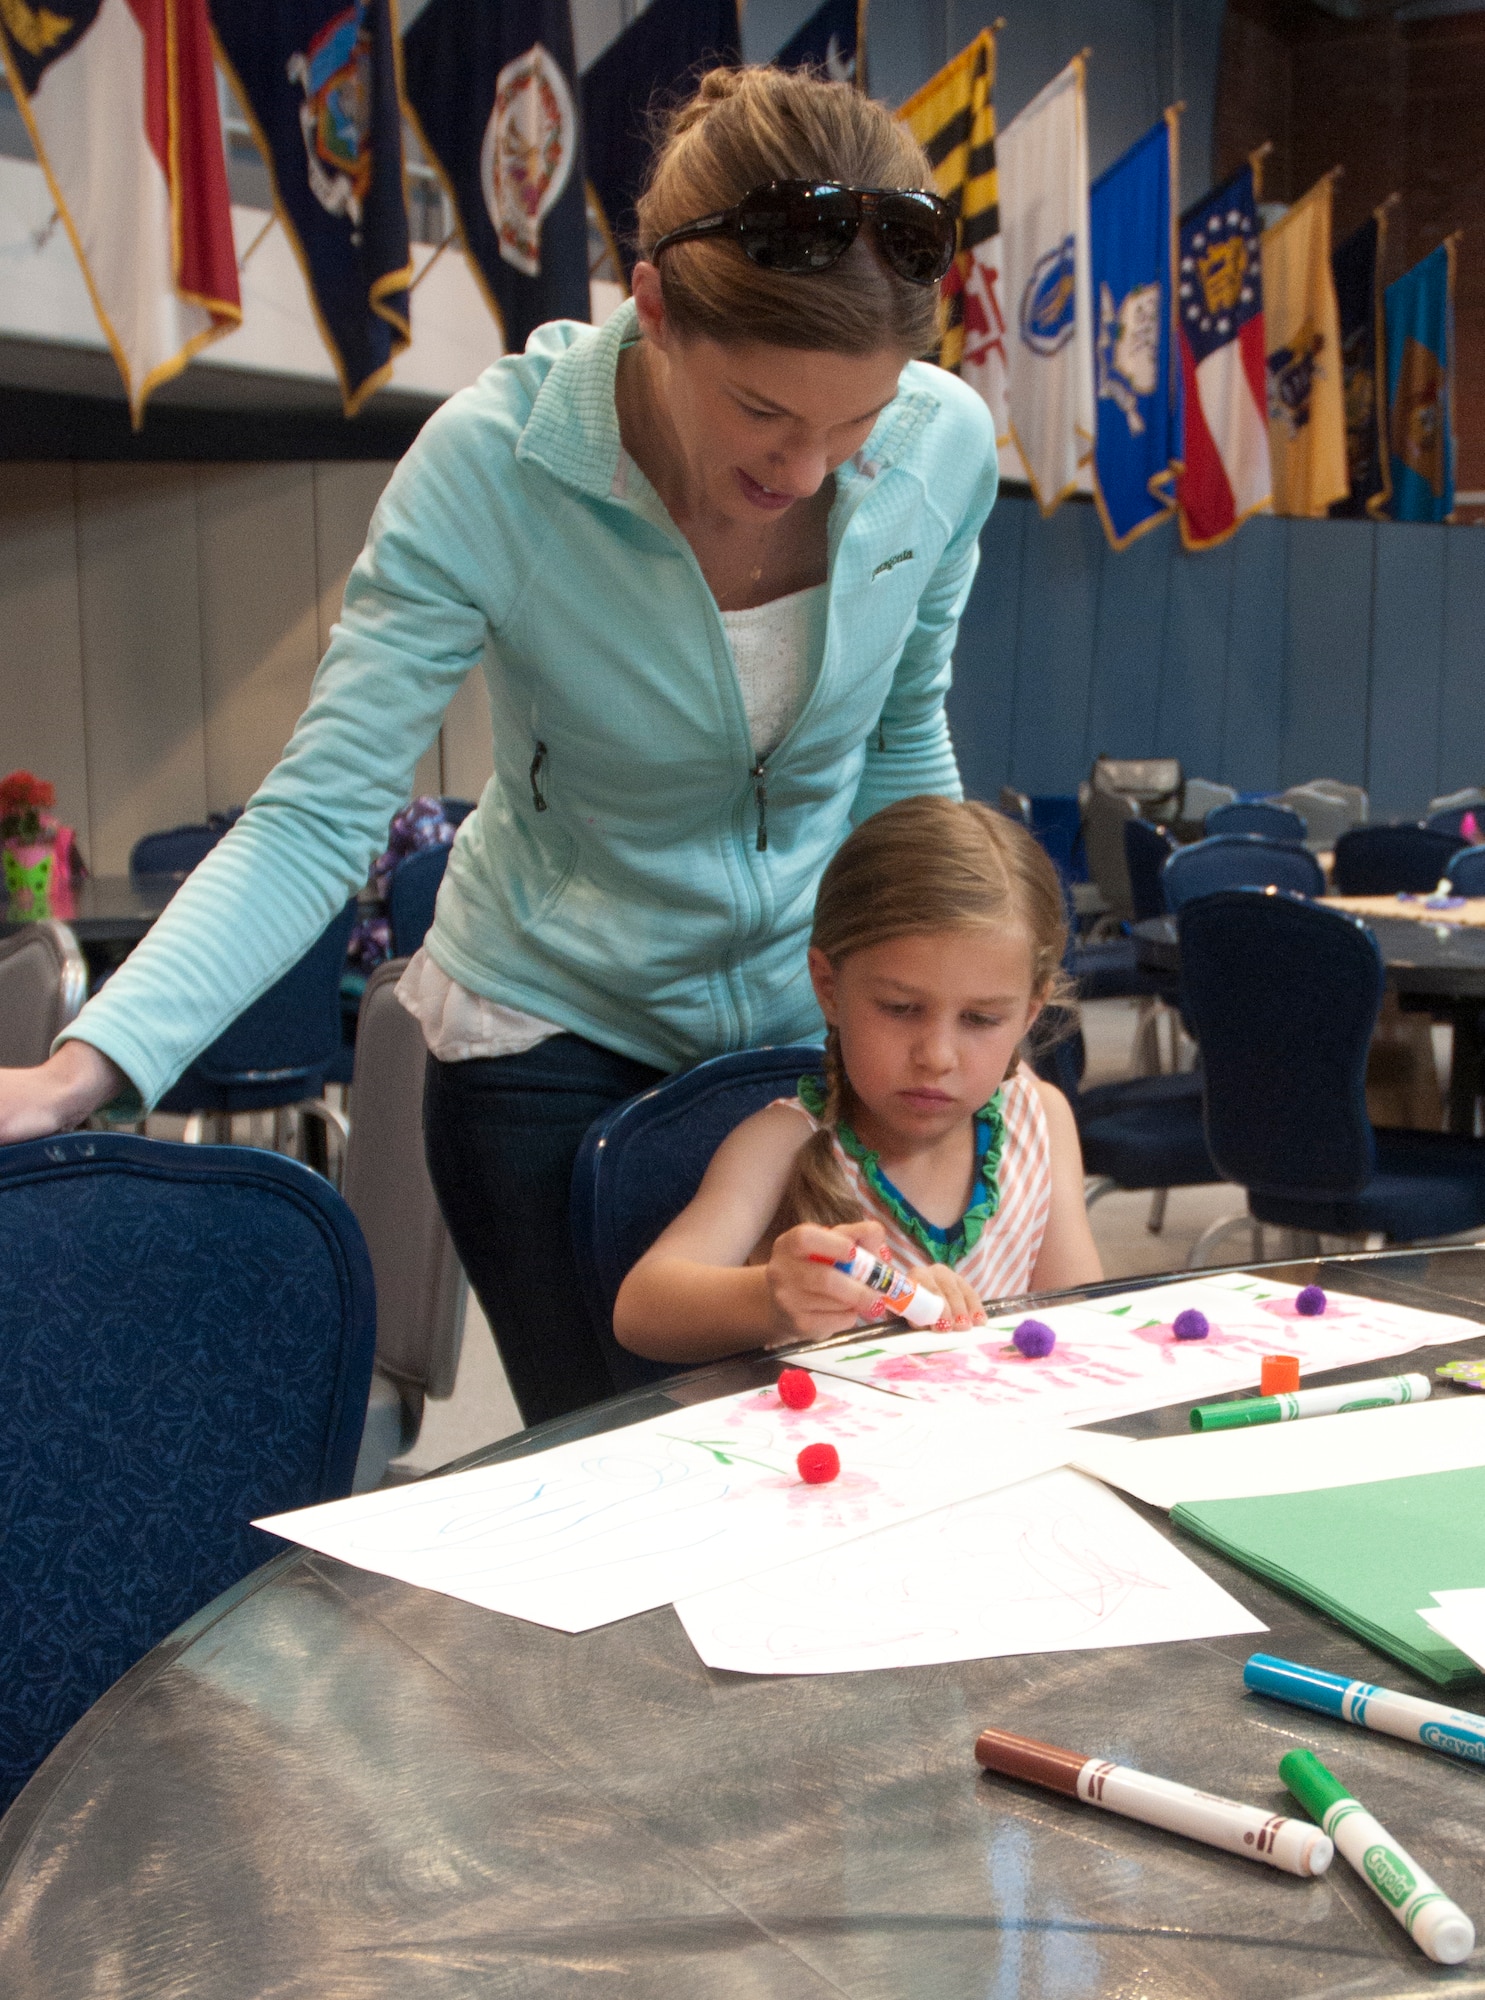 Capt. Carly Clark watches her daughter, Rory, 5, make her a Mother’s Day gift May 10 during the Mommy and Me Tea and Craft event in the Fall Hall Community Center. Clark is visiting from the Aerospace Data Facility out of Buckley Air Force Base, Colo. (U.S. Air Force photo by Airman Malcolm Mayfield)